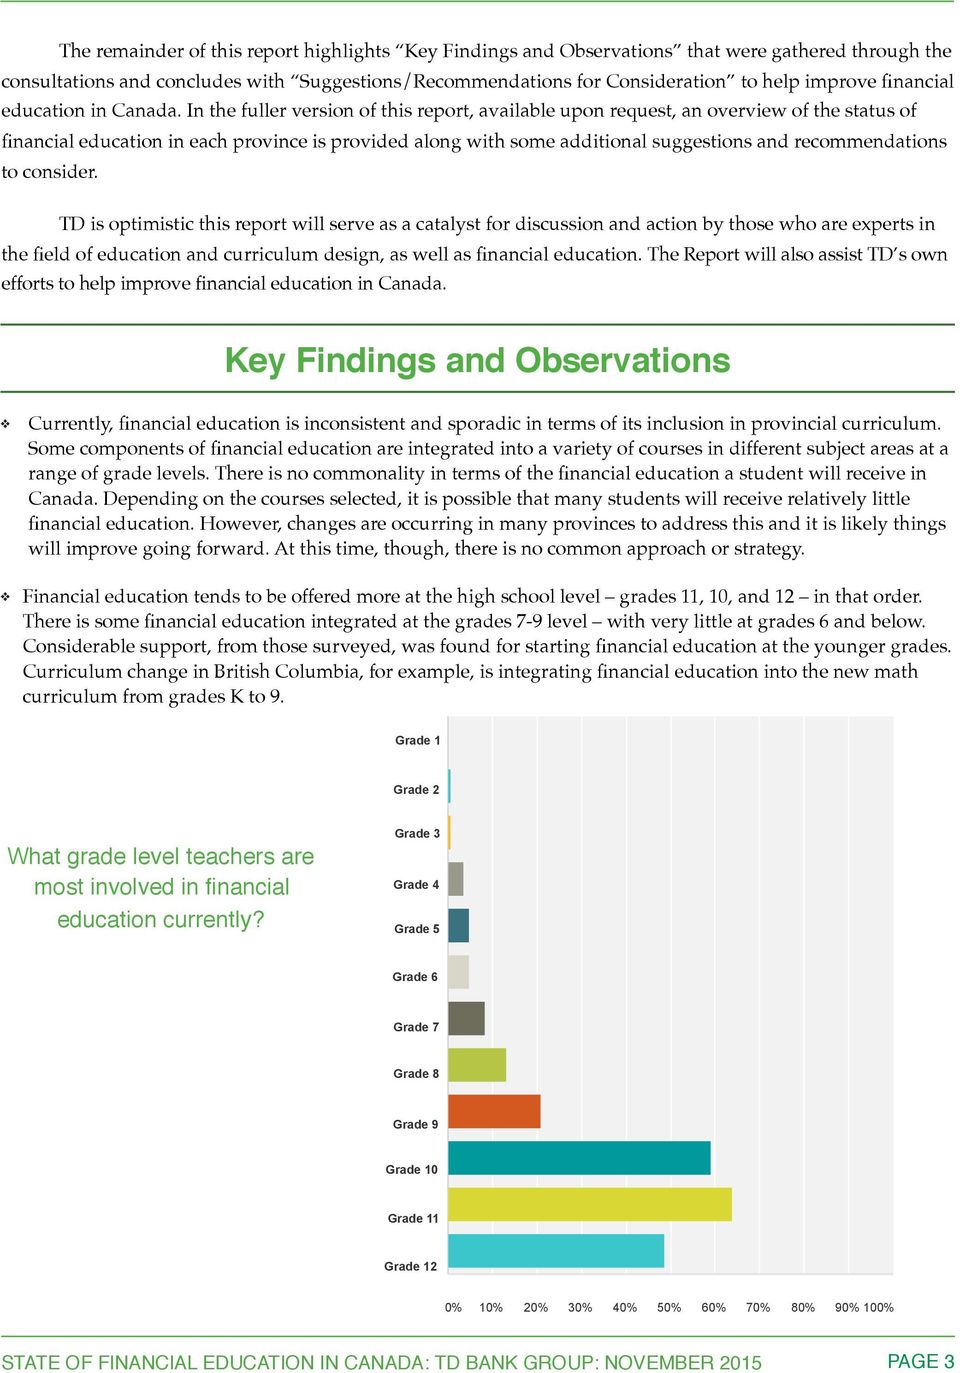 In the fuller version of this report, available upon request, an overview of the status of financial education in each province is provided along with some additional suggestions and recommendations